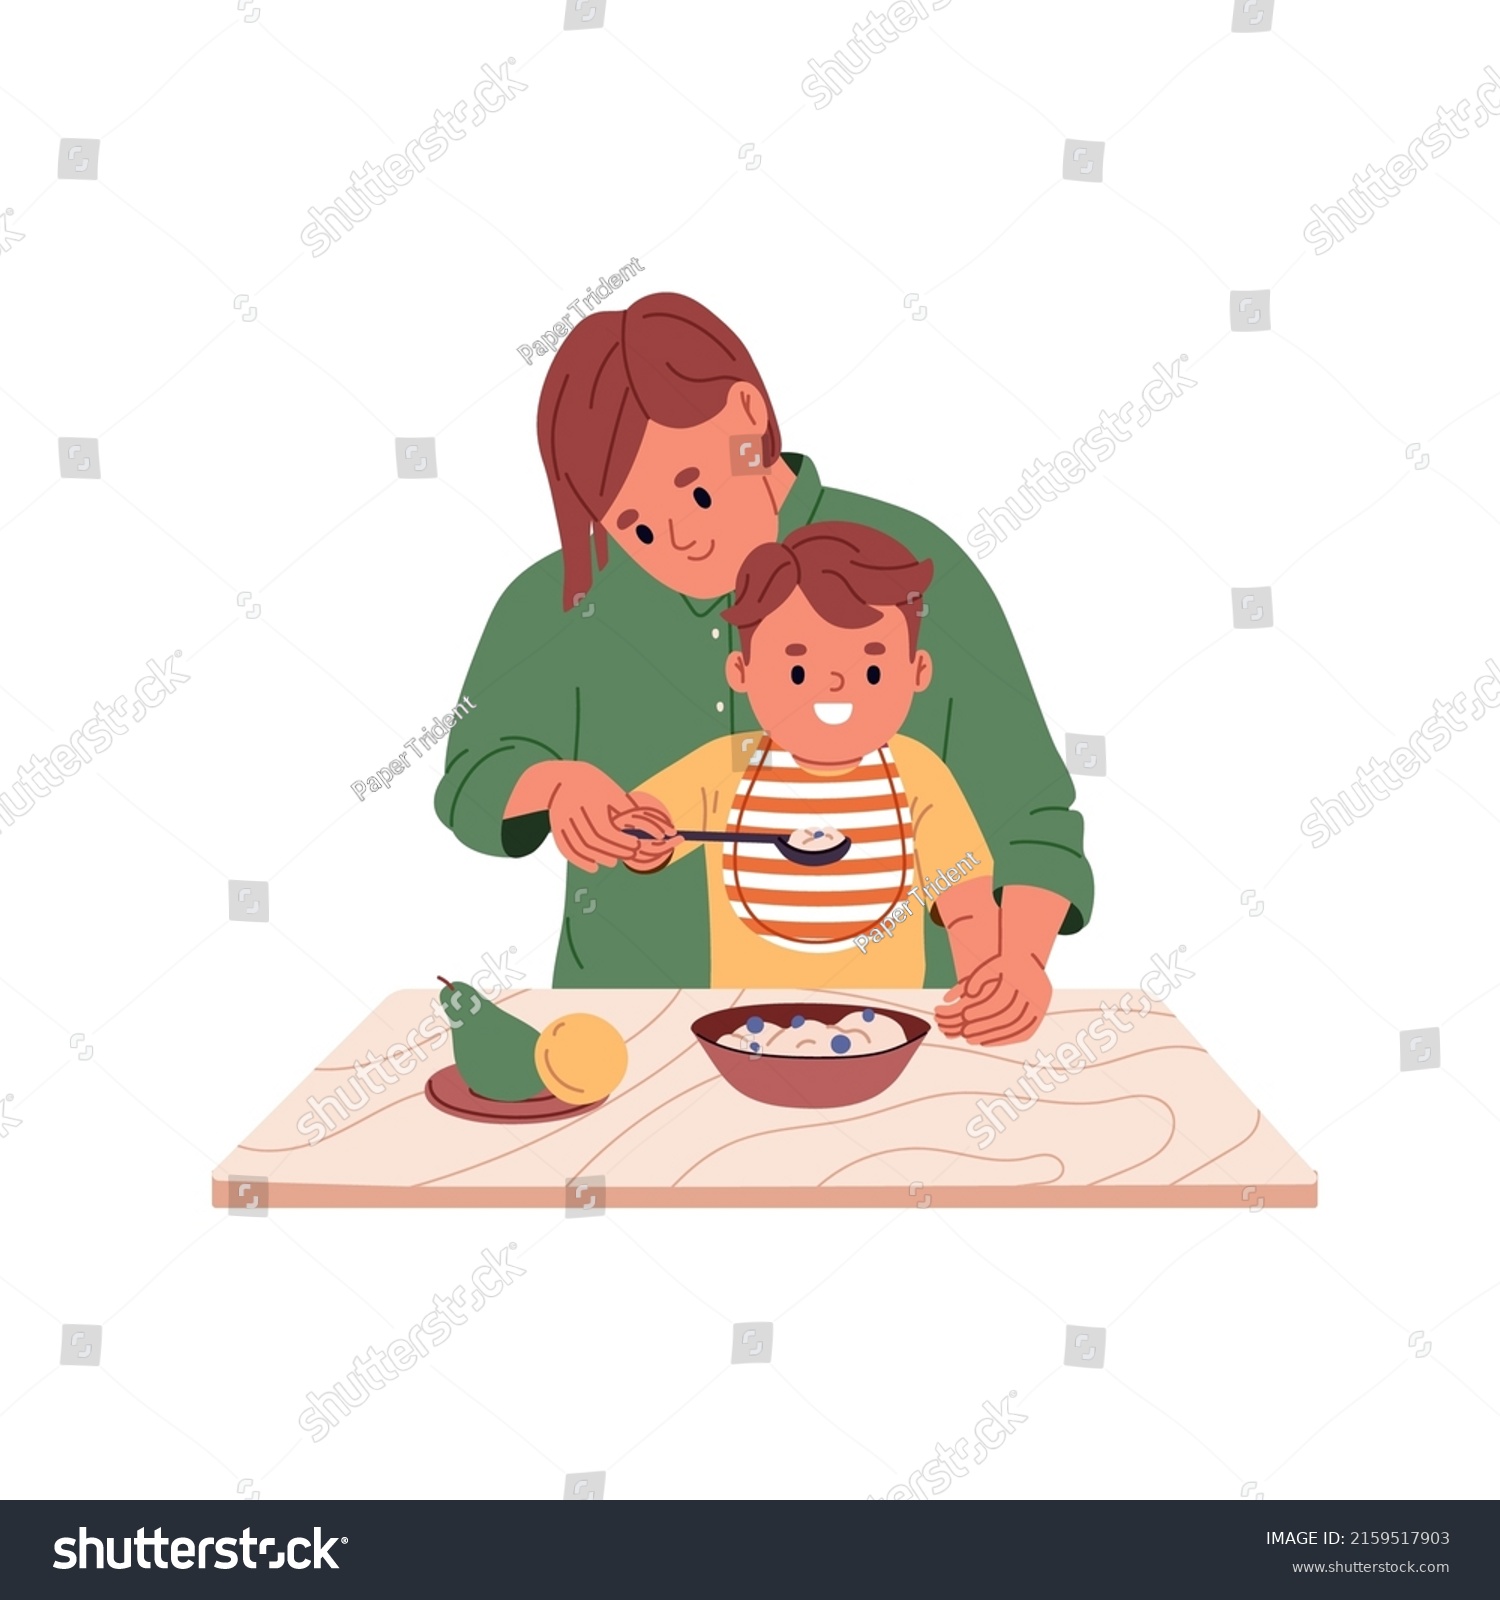 SVG of Mom helping kid with food. Mother feeding child from spoon. Happy baby in nib eating healthy nutrition, porridge with berries, sitting at table. Flat vector illustration isolated on white background svg